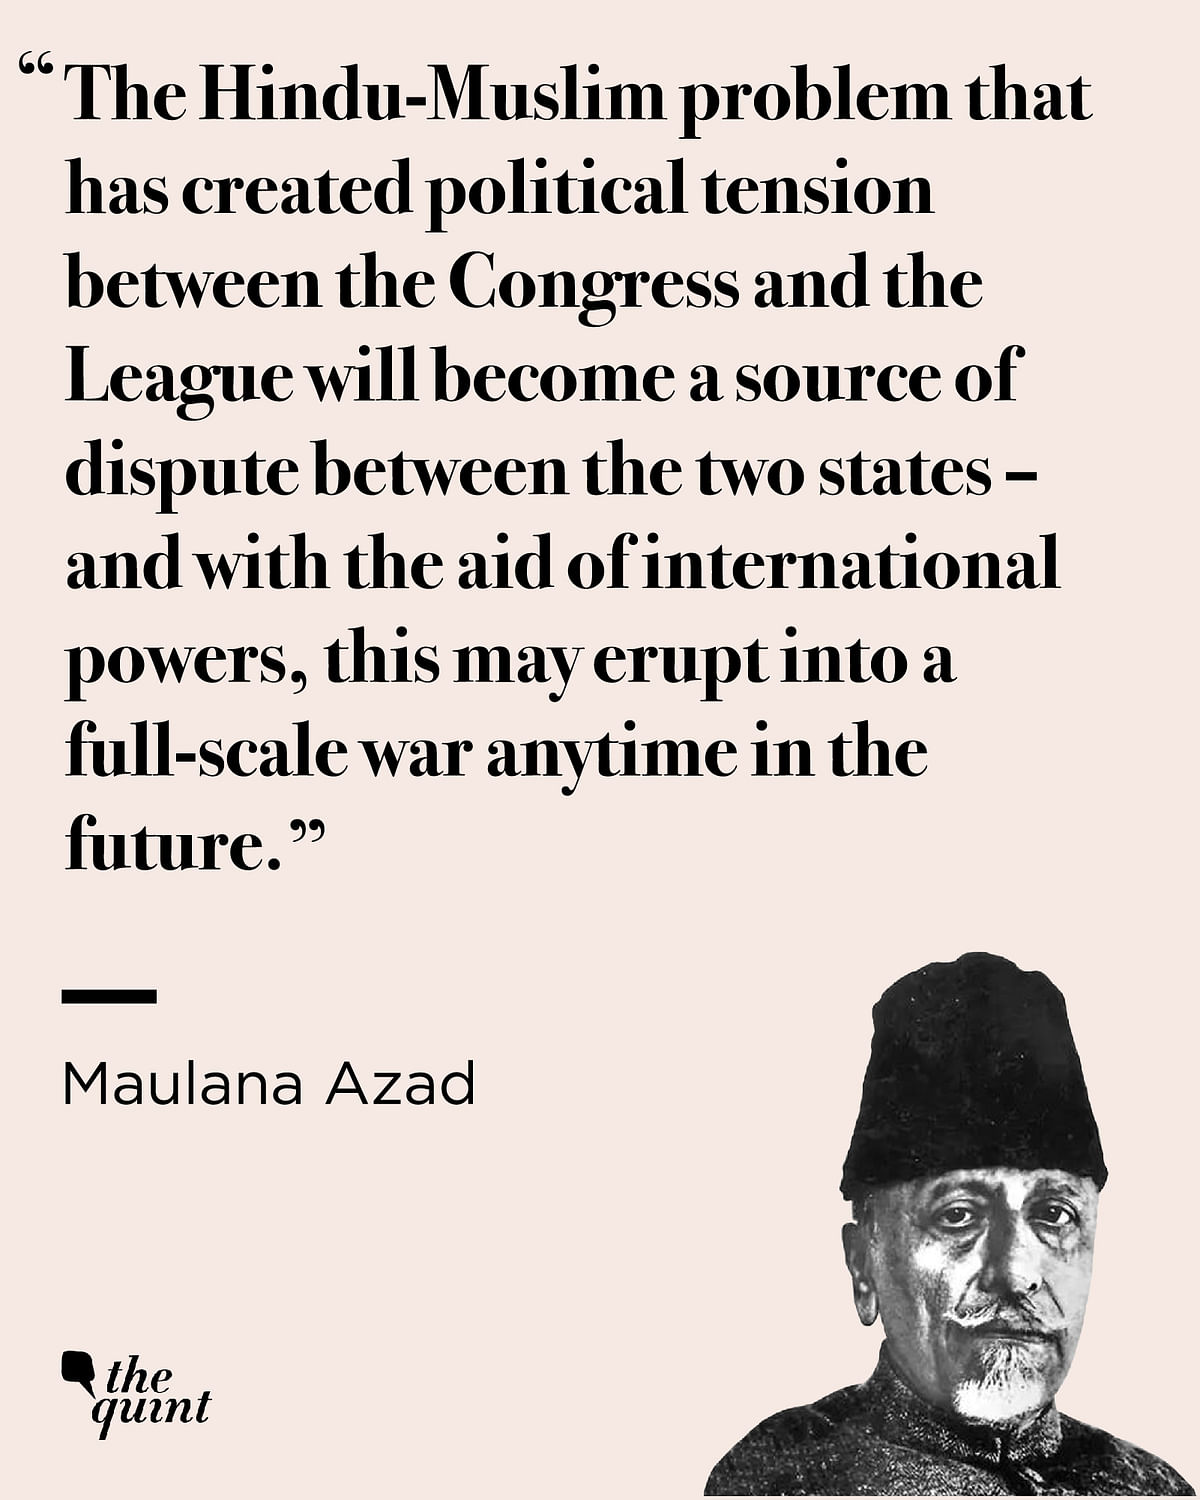 It’s such a pity that leaders like Maulana Abul Kalam Azad have faded from India’s political conscience. 